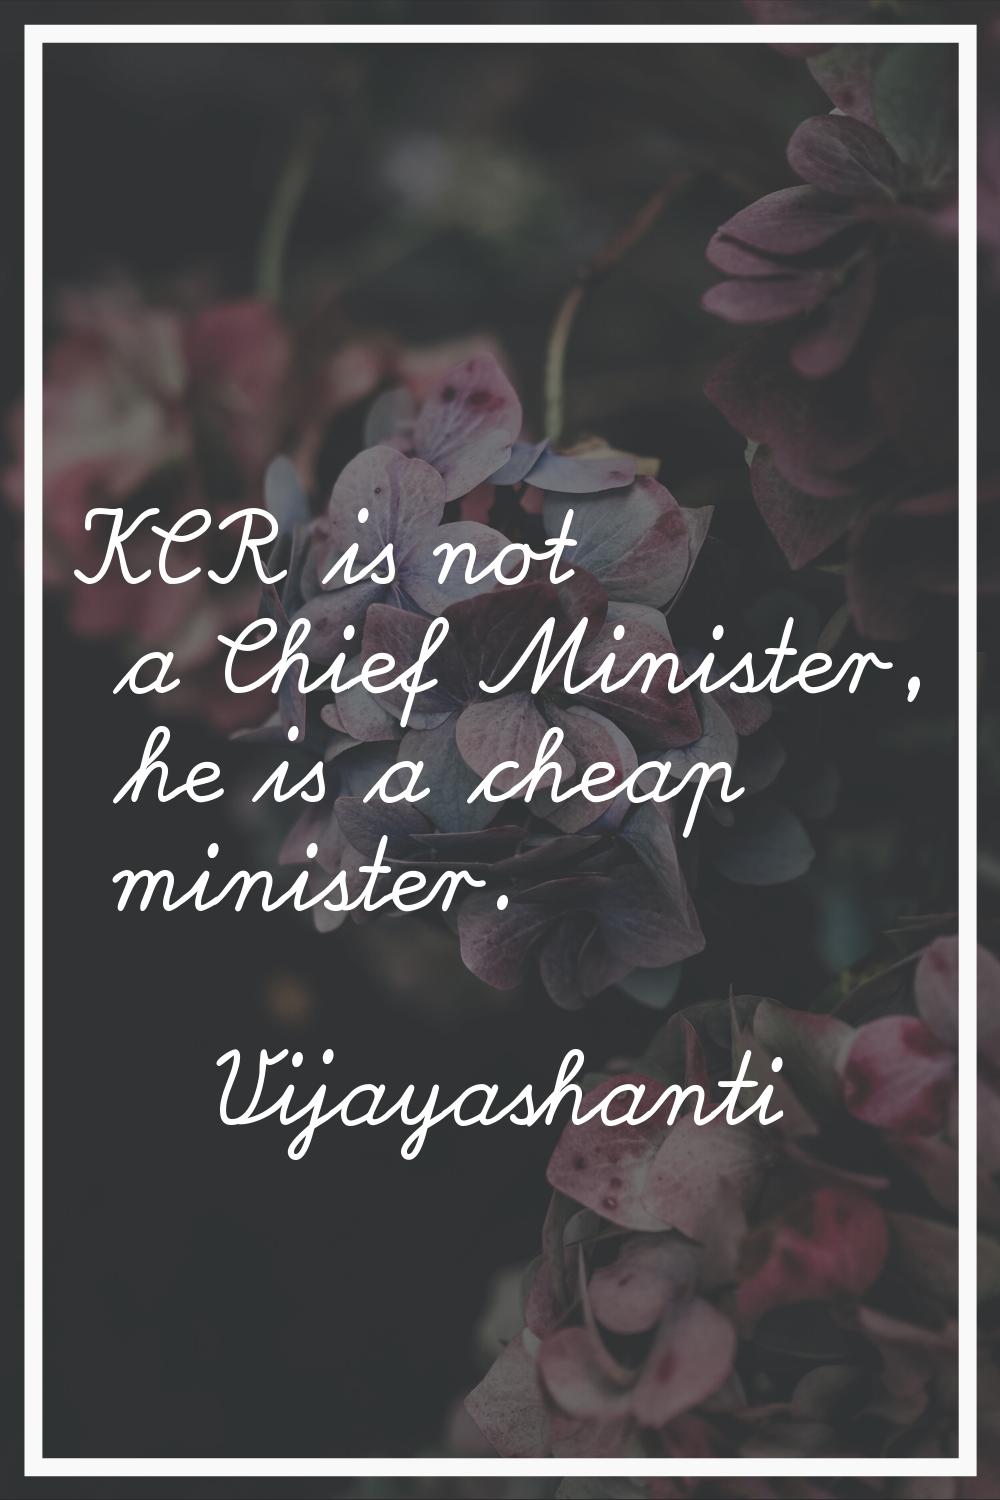 KCR is not a Chief Minister, he is a cheap minister.